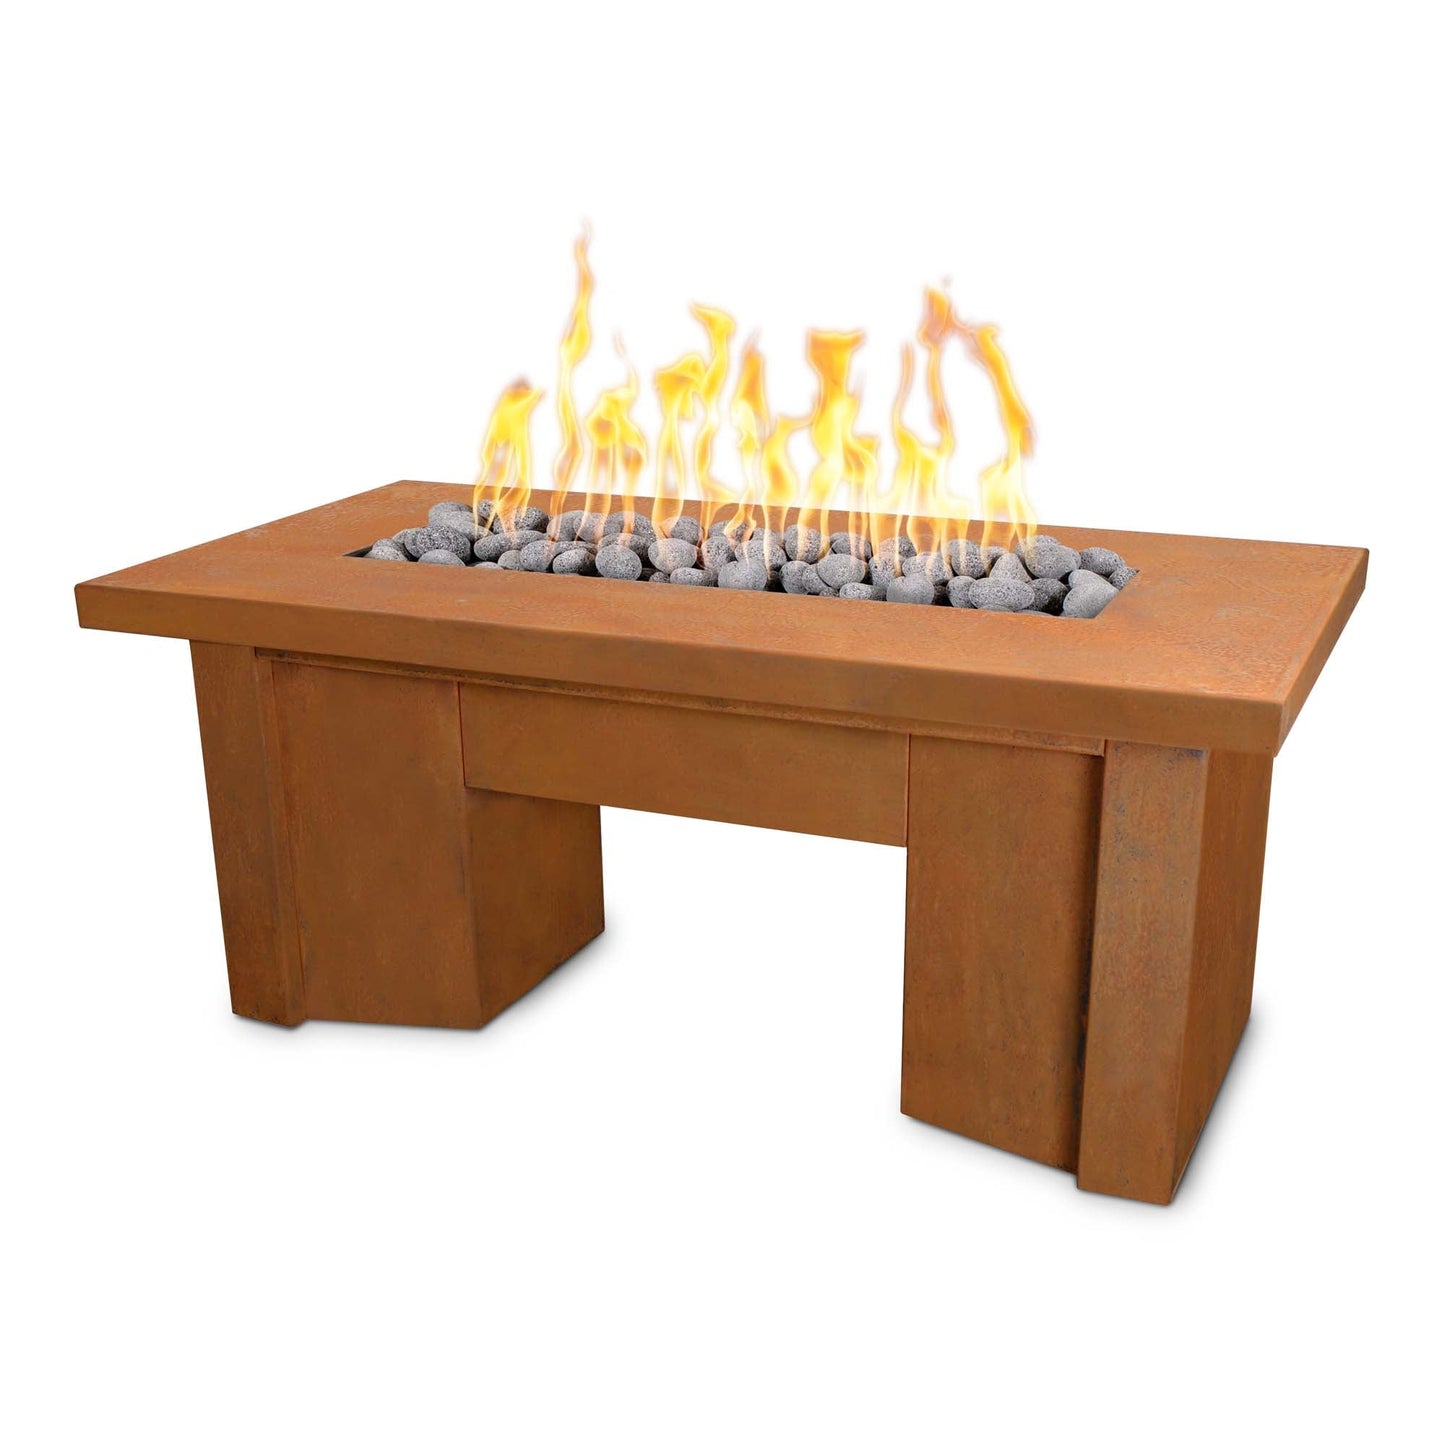 The Outdoor Plus Rectangular Alameda 78" Corten Steel Liquid Propane Fire Pit with 110V Electronic Ignition